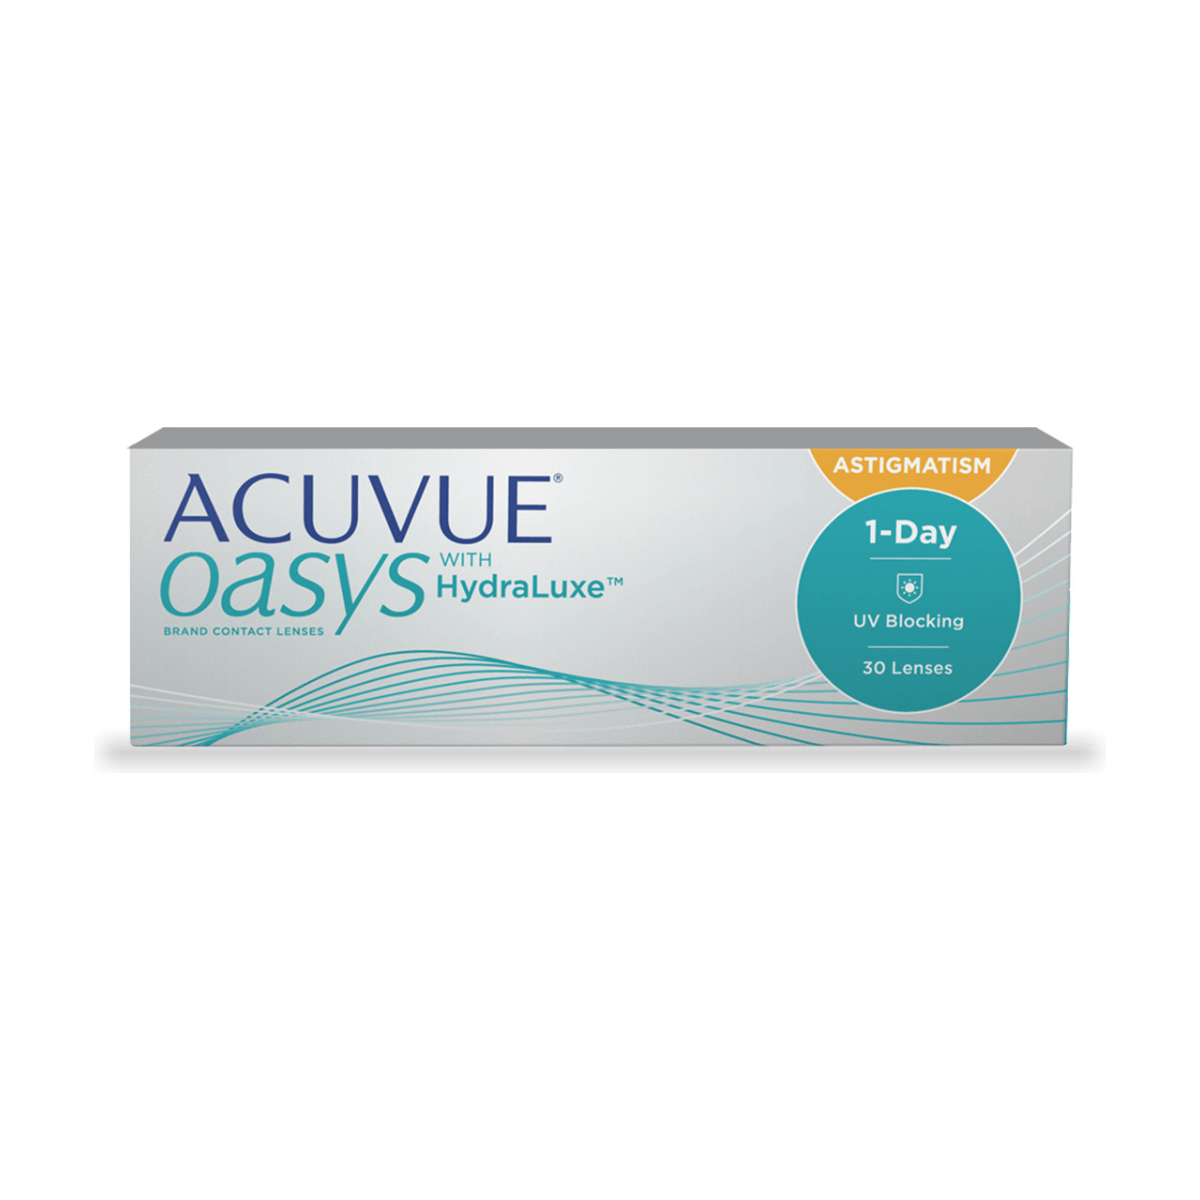 ACUVUE OASYS 1DAY DAILY DISPOSABLE CONTACT LENSES FOR ASTIGMATISM (30 LENSES)